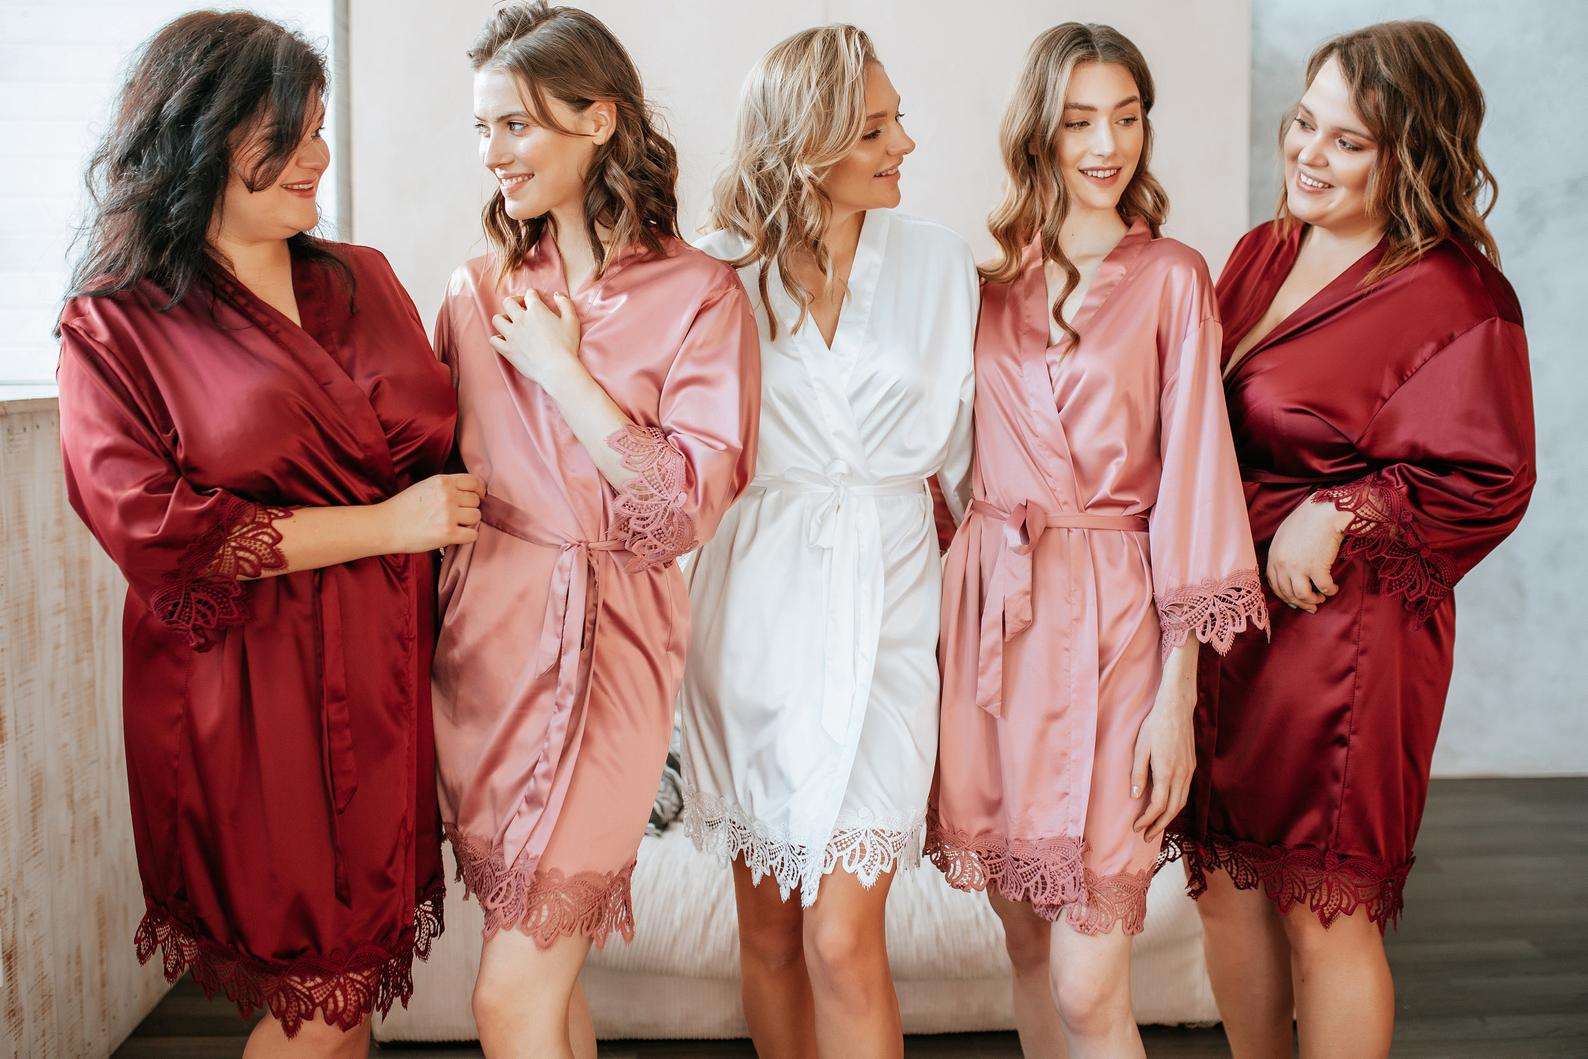 VovoRobesUS on Etsy: Bridesmaids Robes Embroidered